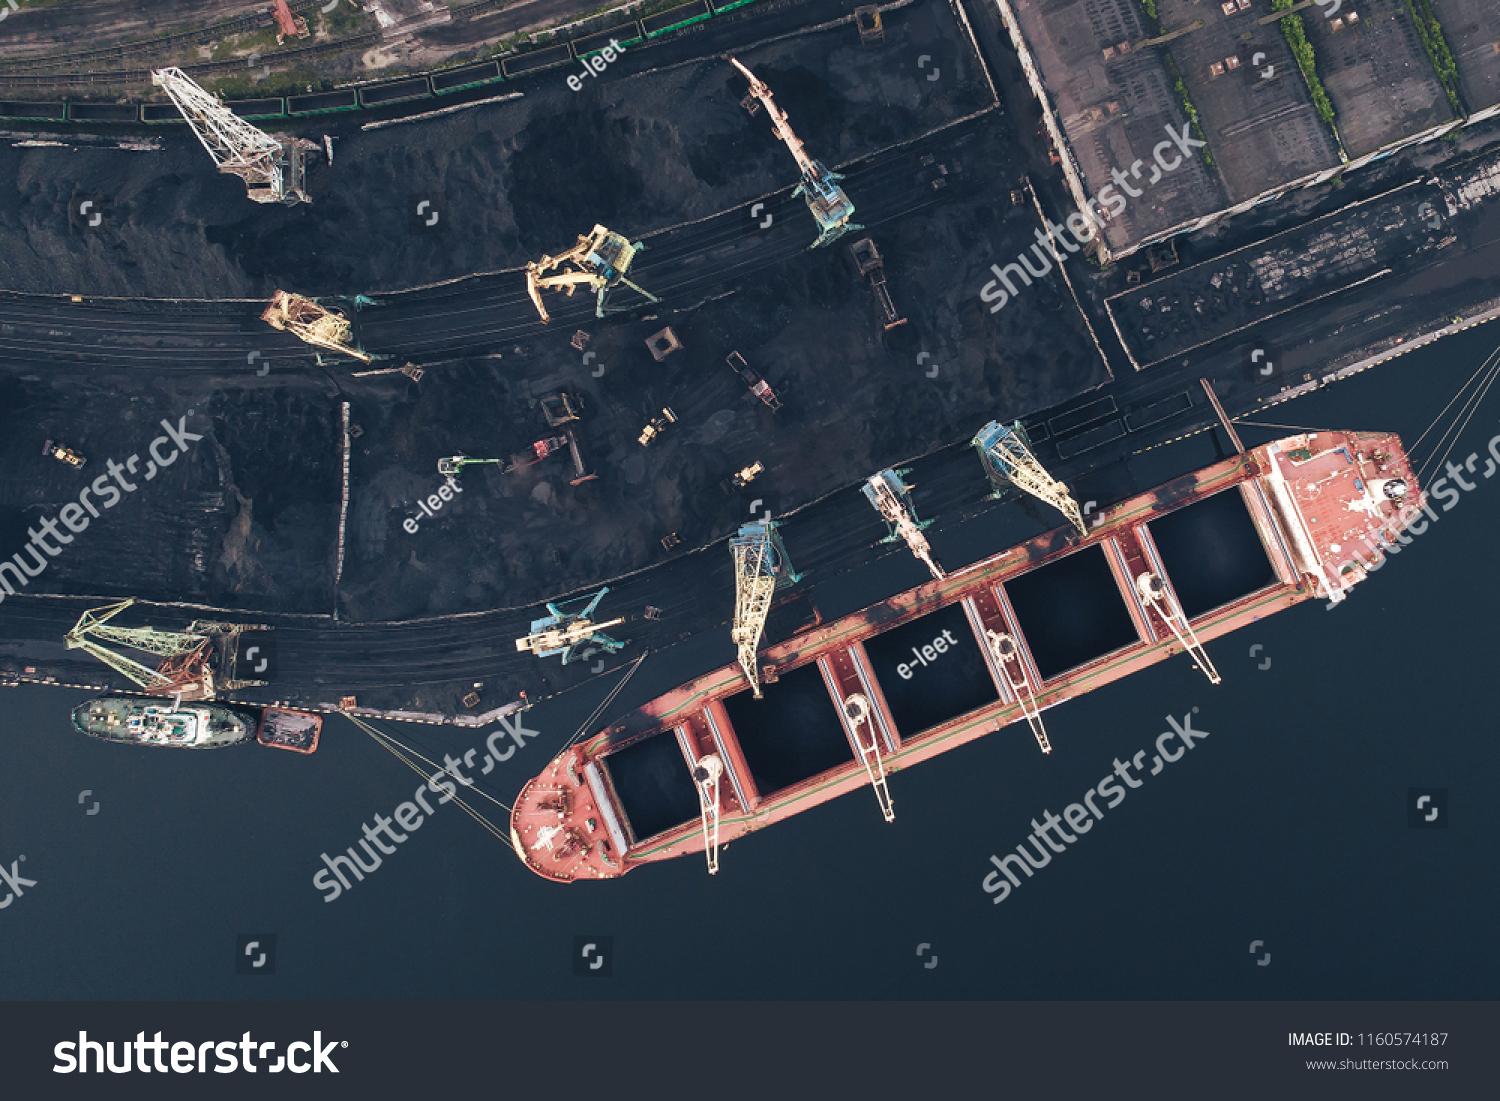 The Cargo Ship is in the Port Pier at the Loading of Coal at Sunset. Aerial View from Drone. Location Kandalaksha Town, Cola Peninsula, Russia #1160574187